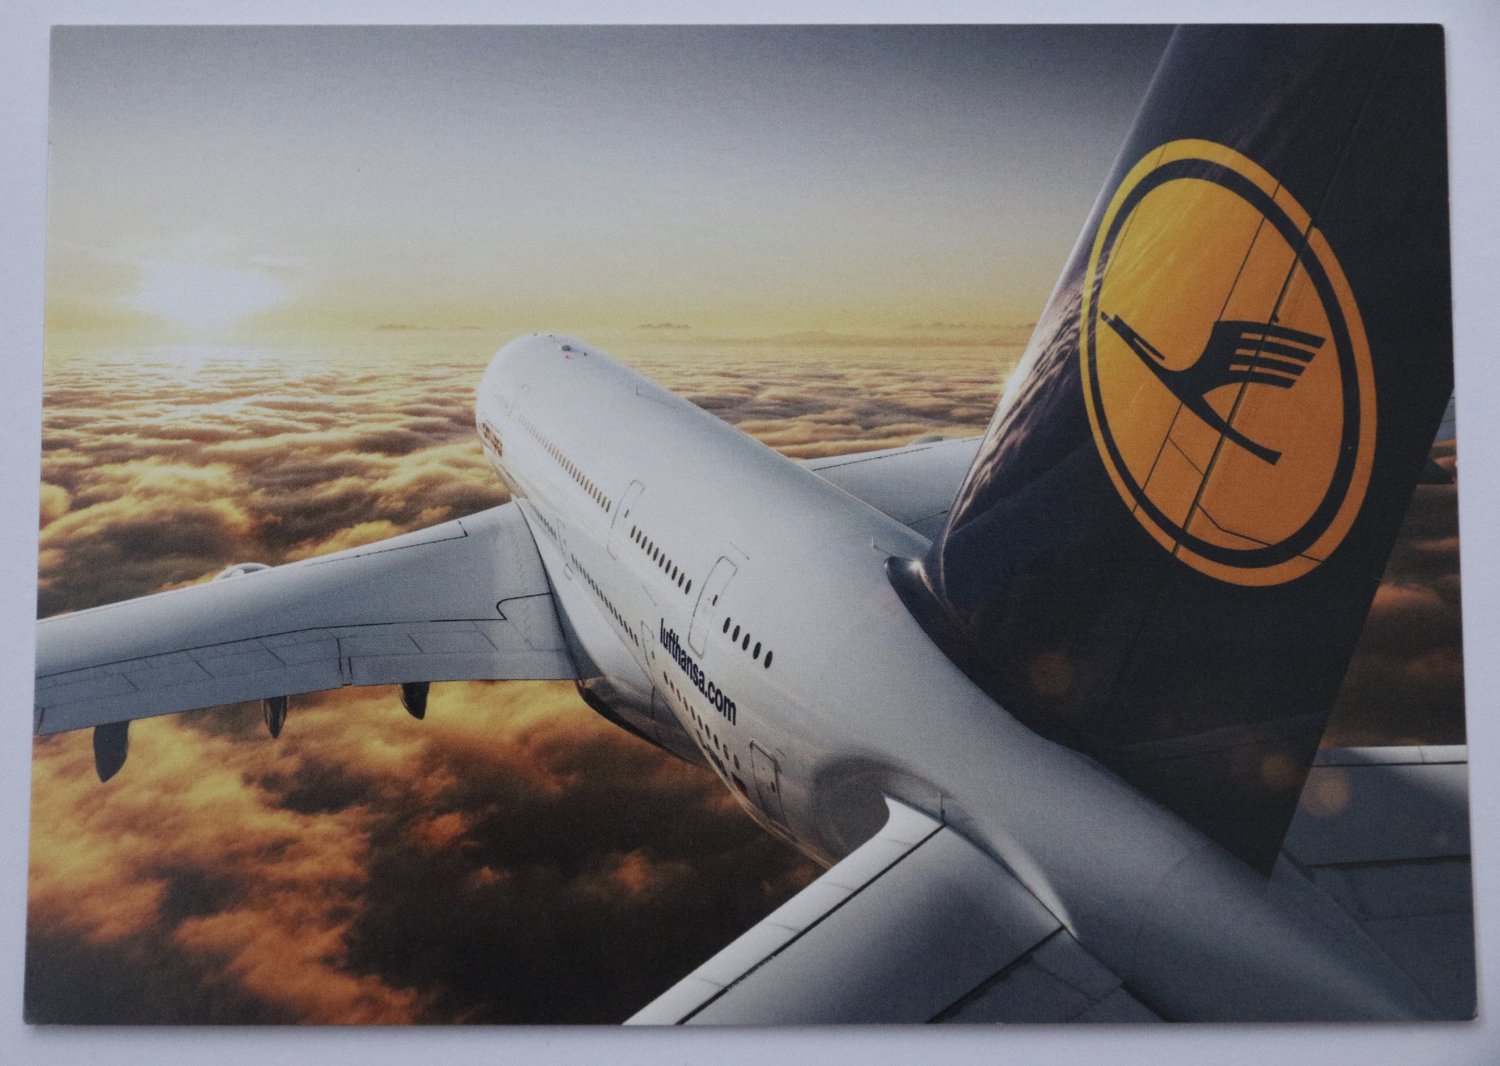 Lufthansa Airlines Airbus A380 Airline Post Card Airplane Germany 2010 Postcard